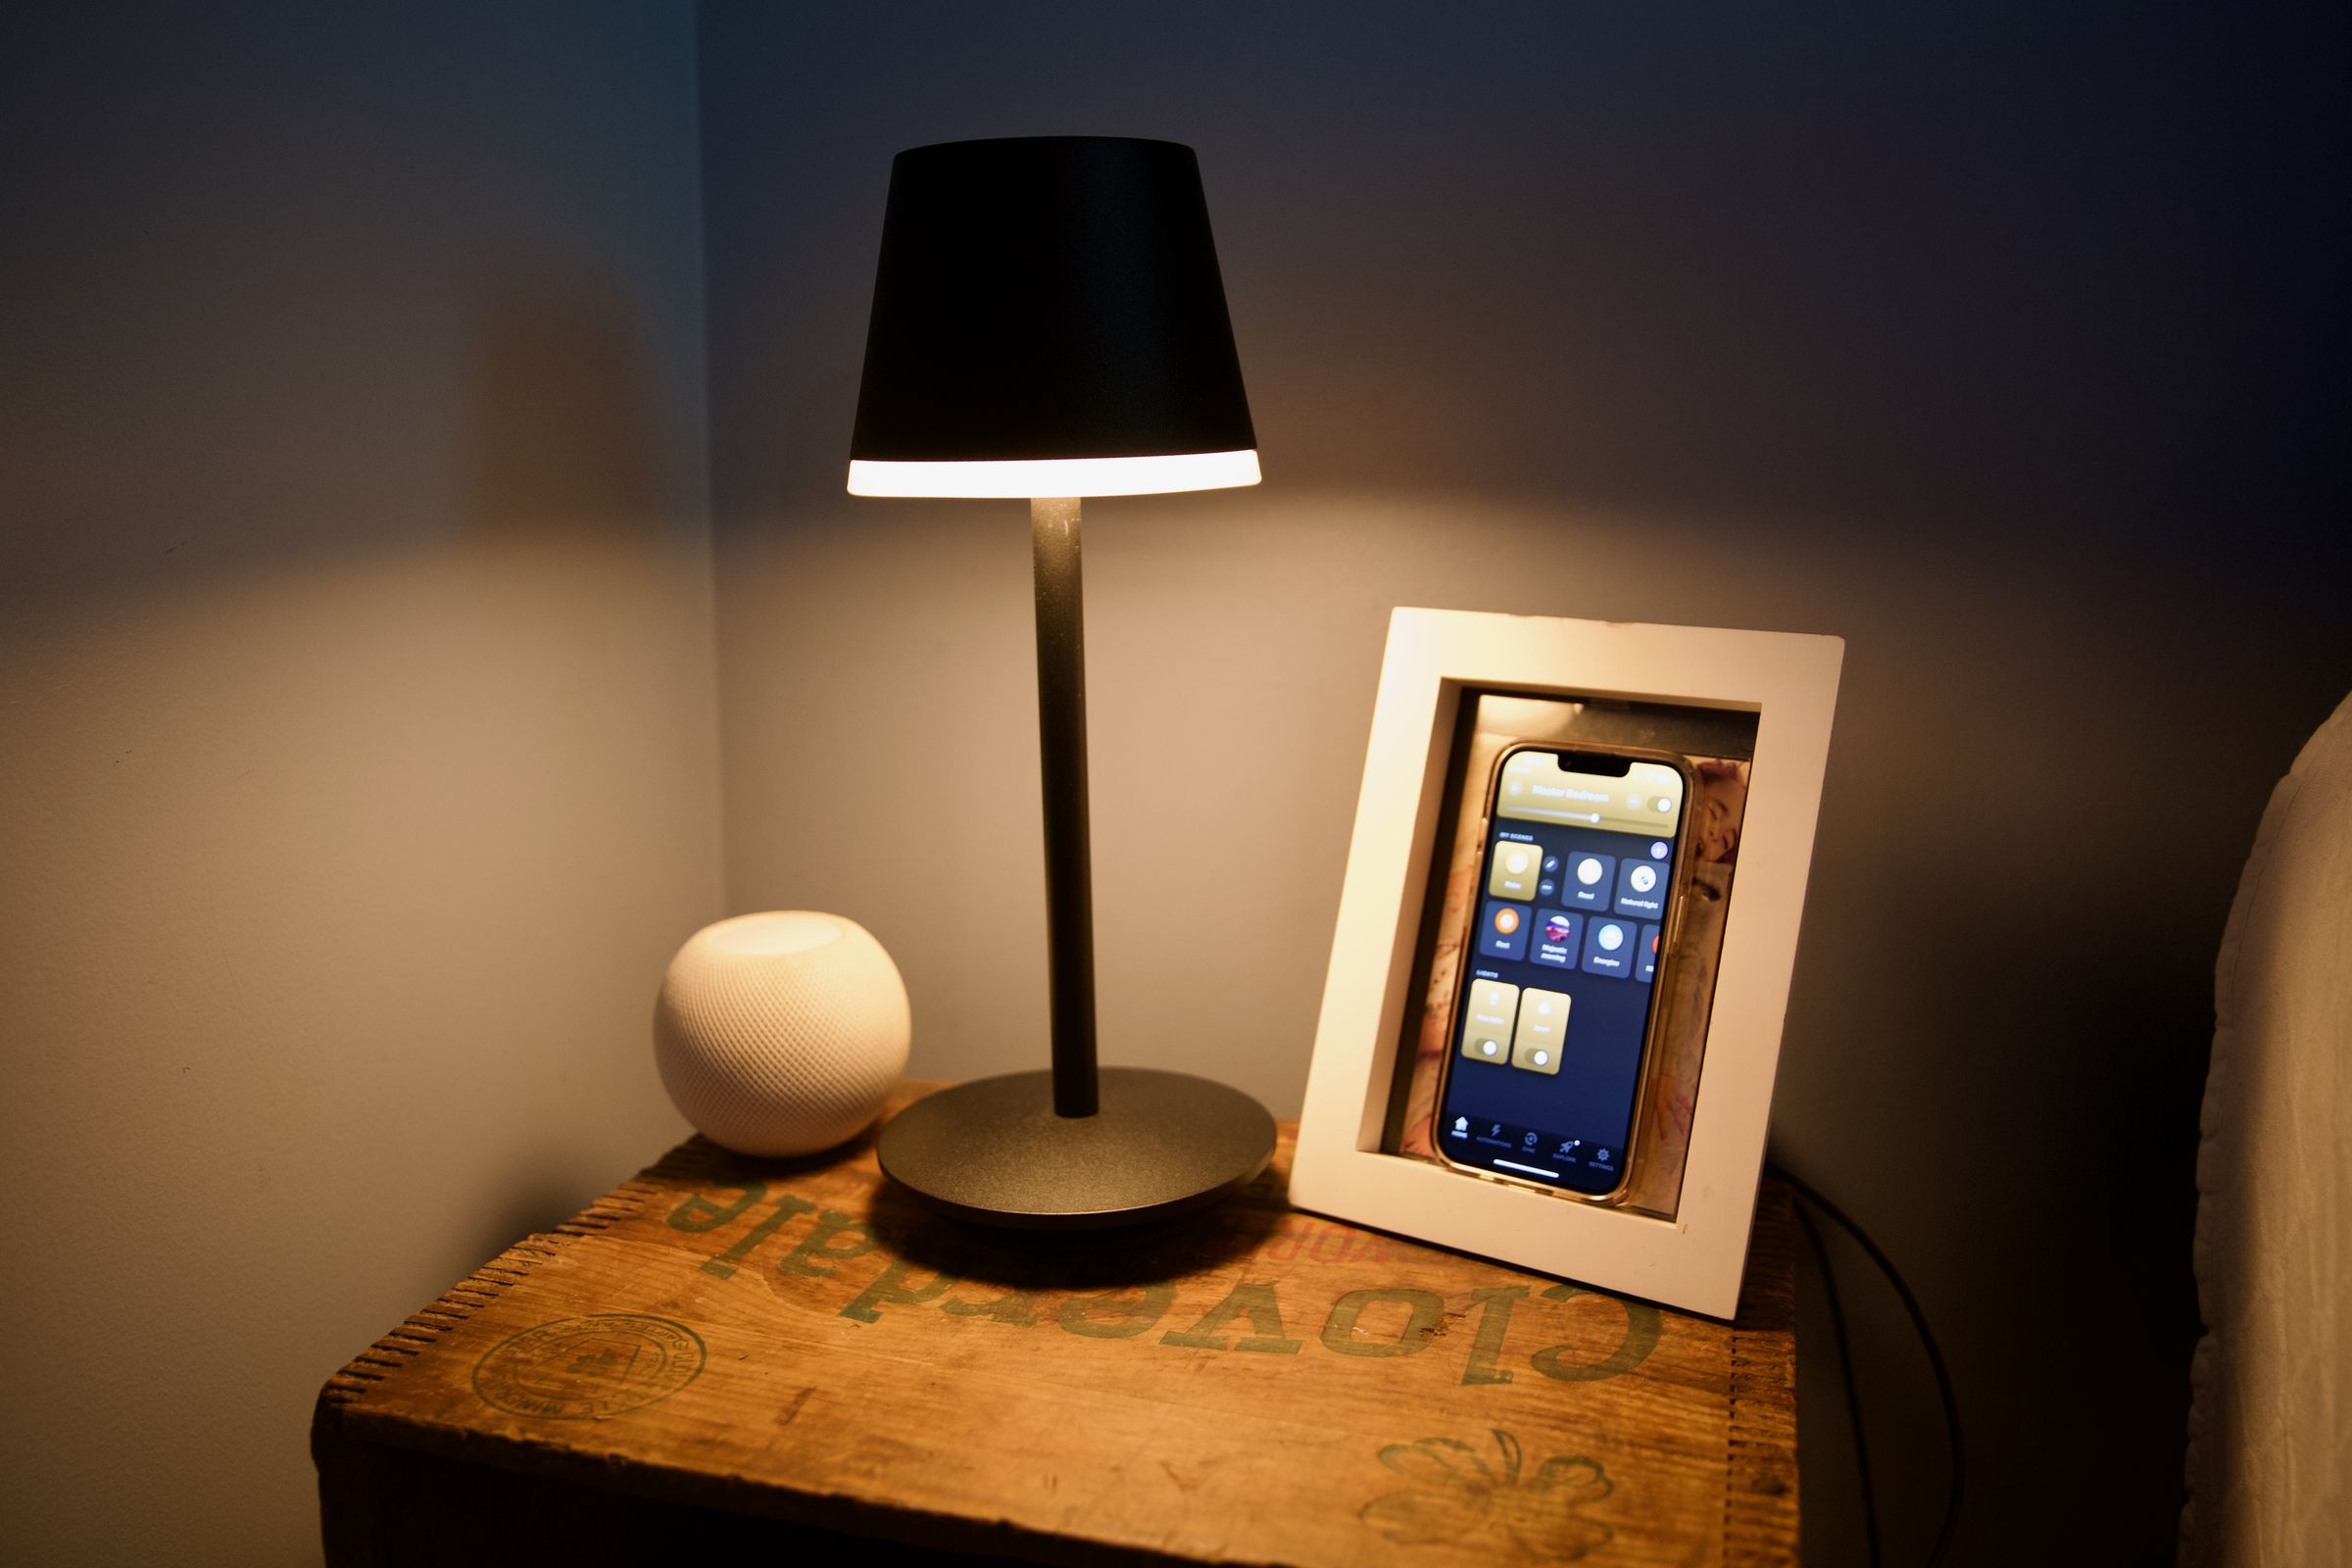 The Hue Go Table Lamp works with the Hue app over Zigbee through the Hue bridge or directly through Bluetooth.